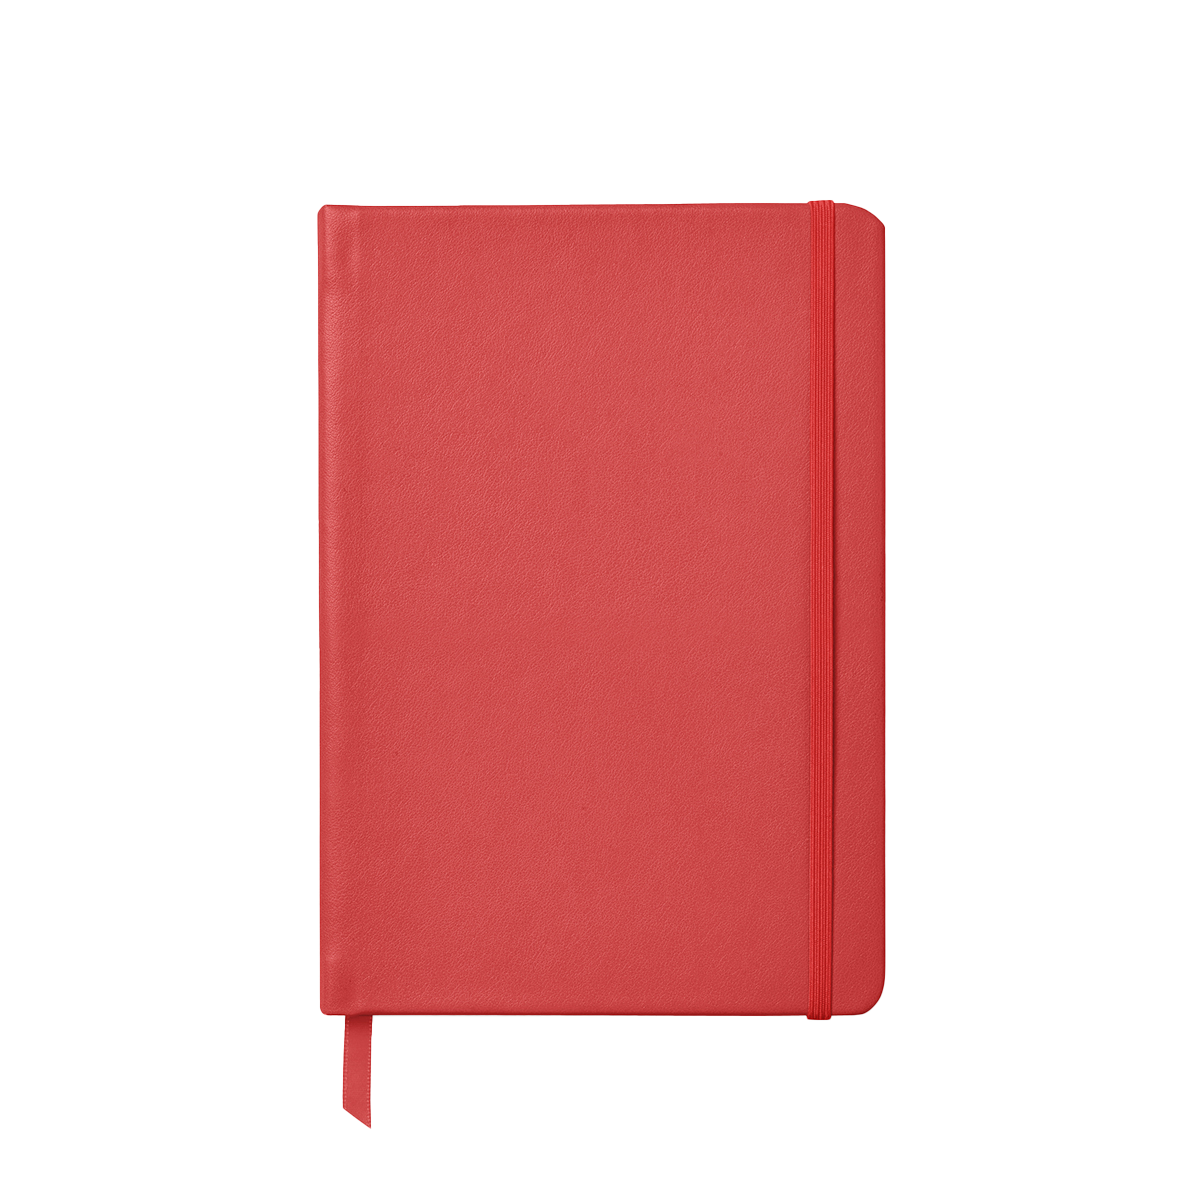 NAB_PF_concept_Soft_notebook_Red_W.png